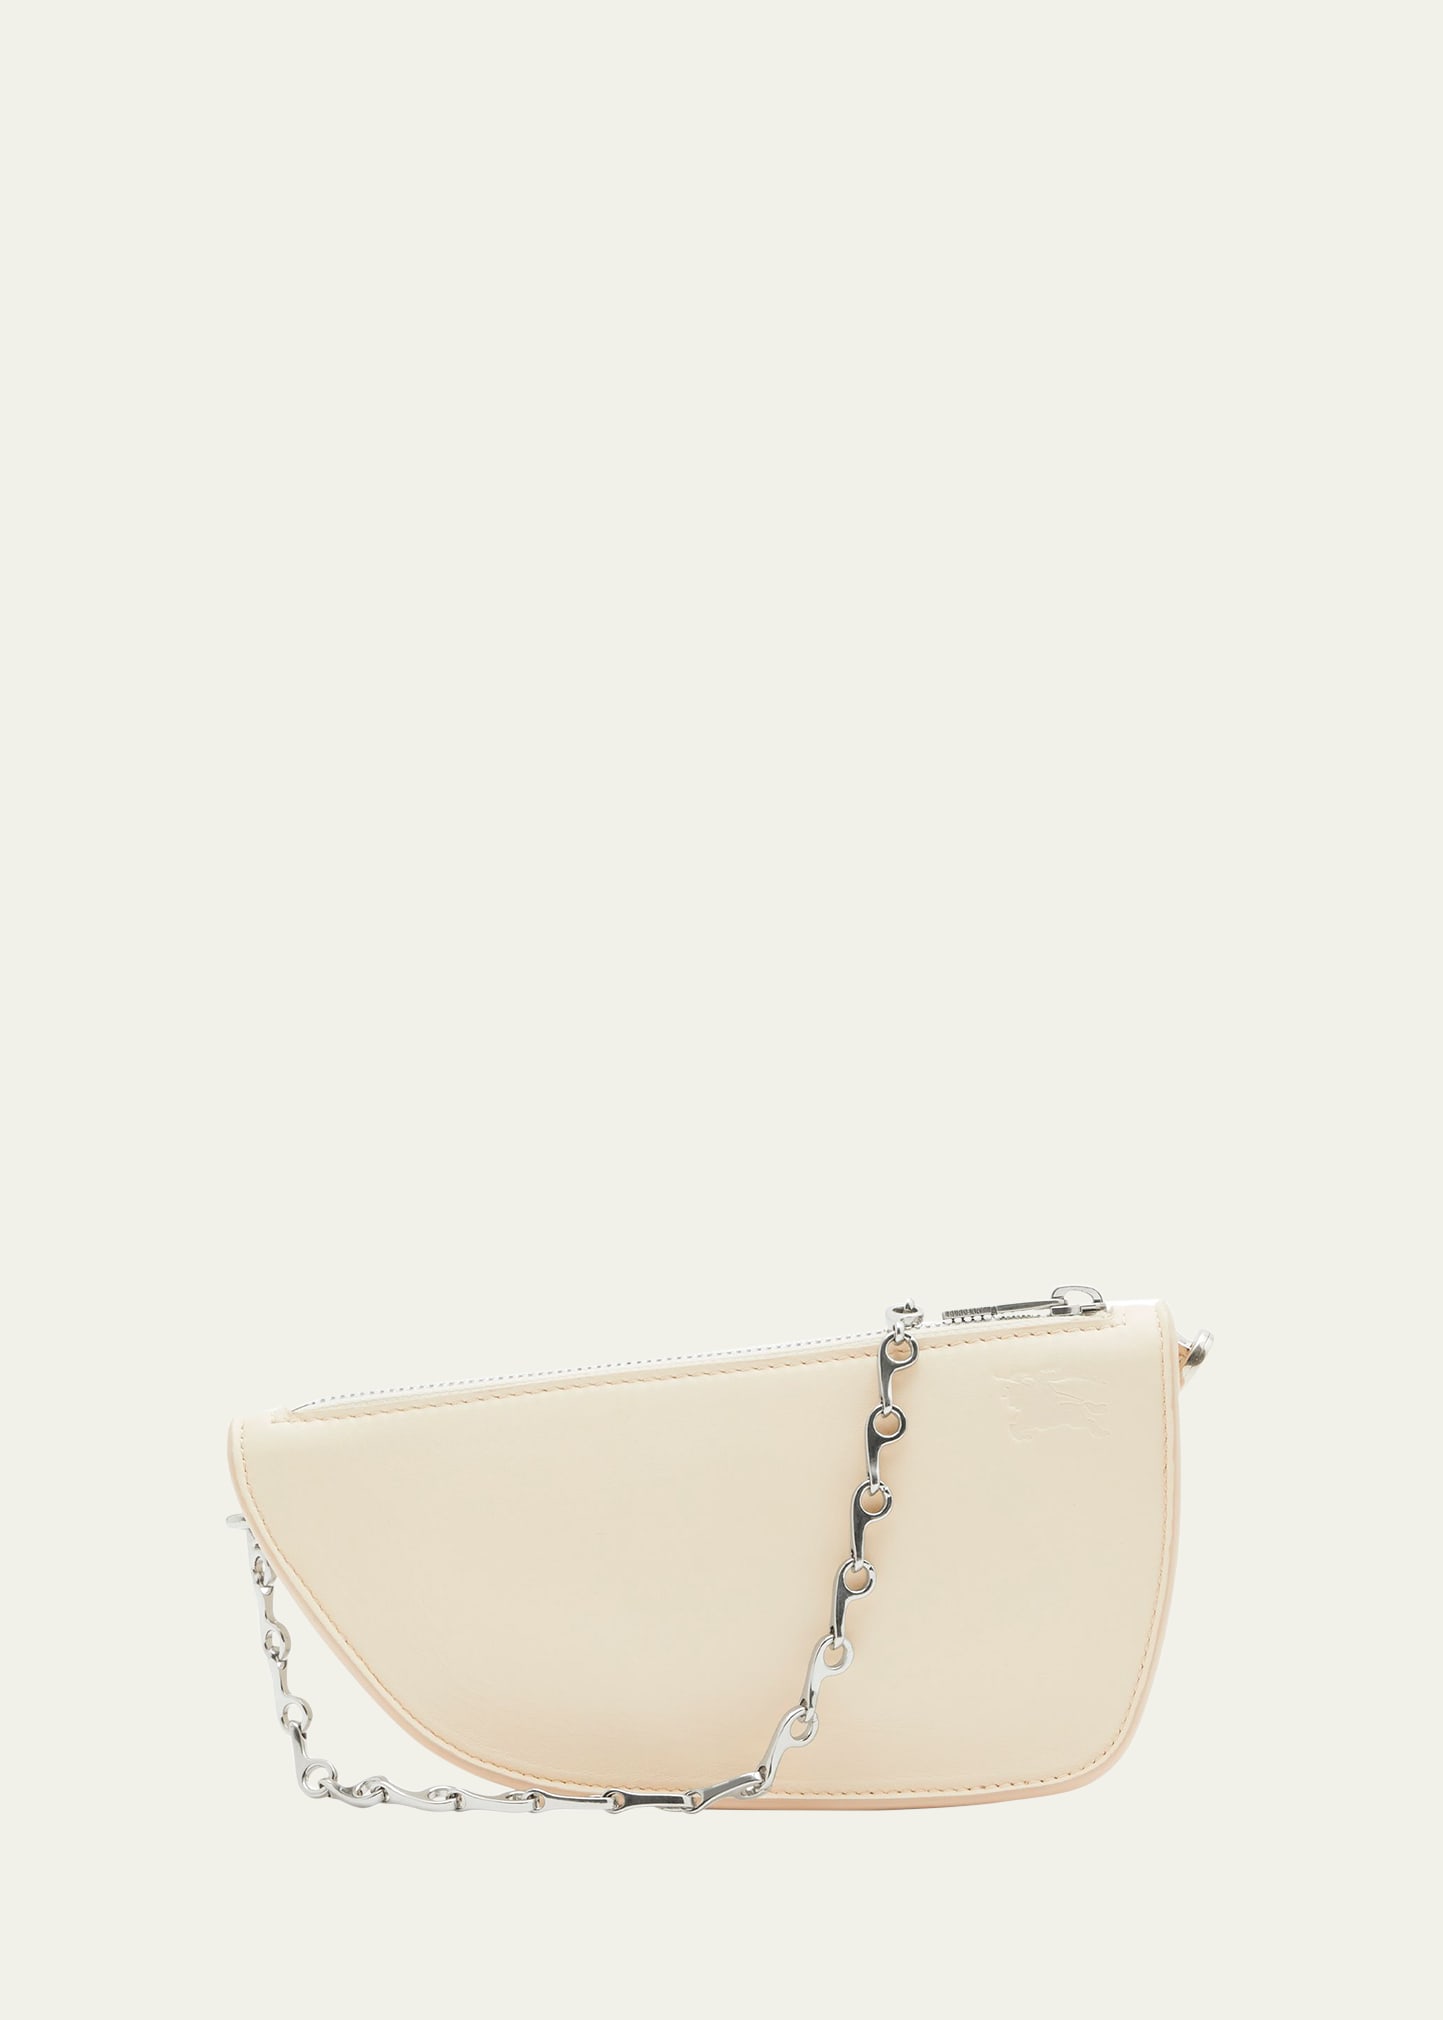 Burberry Micro Shield Leather Shoulder Bag